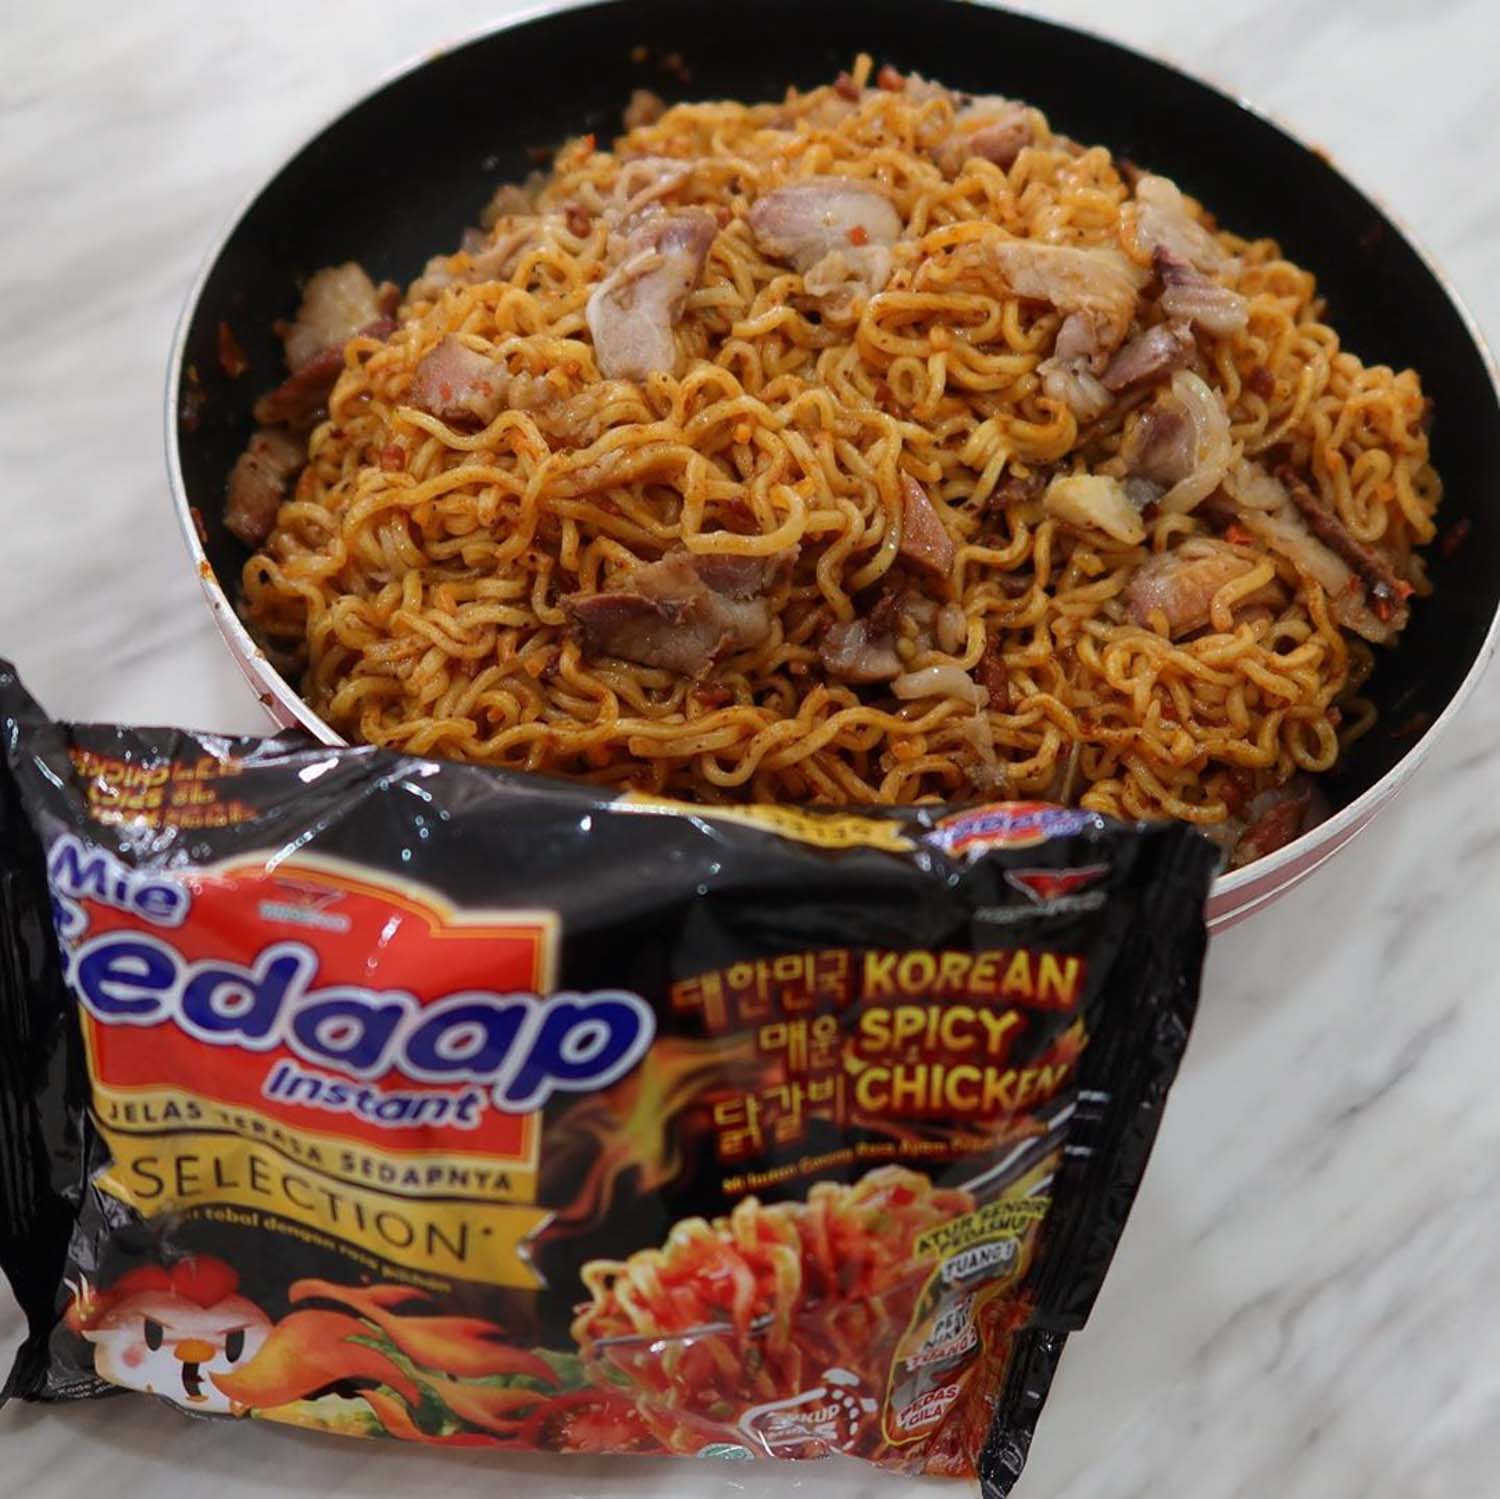 Mie Sedaap Has New Korean Spicy Chicken Flavoured Noodles For Instant